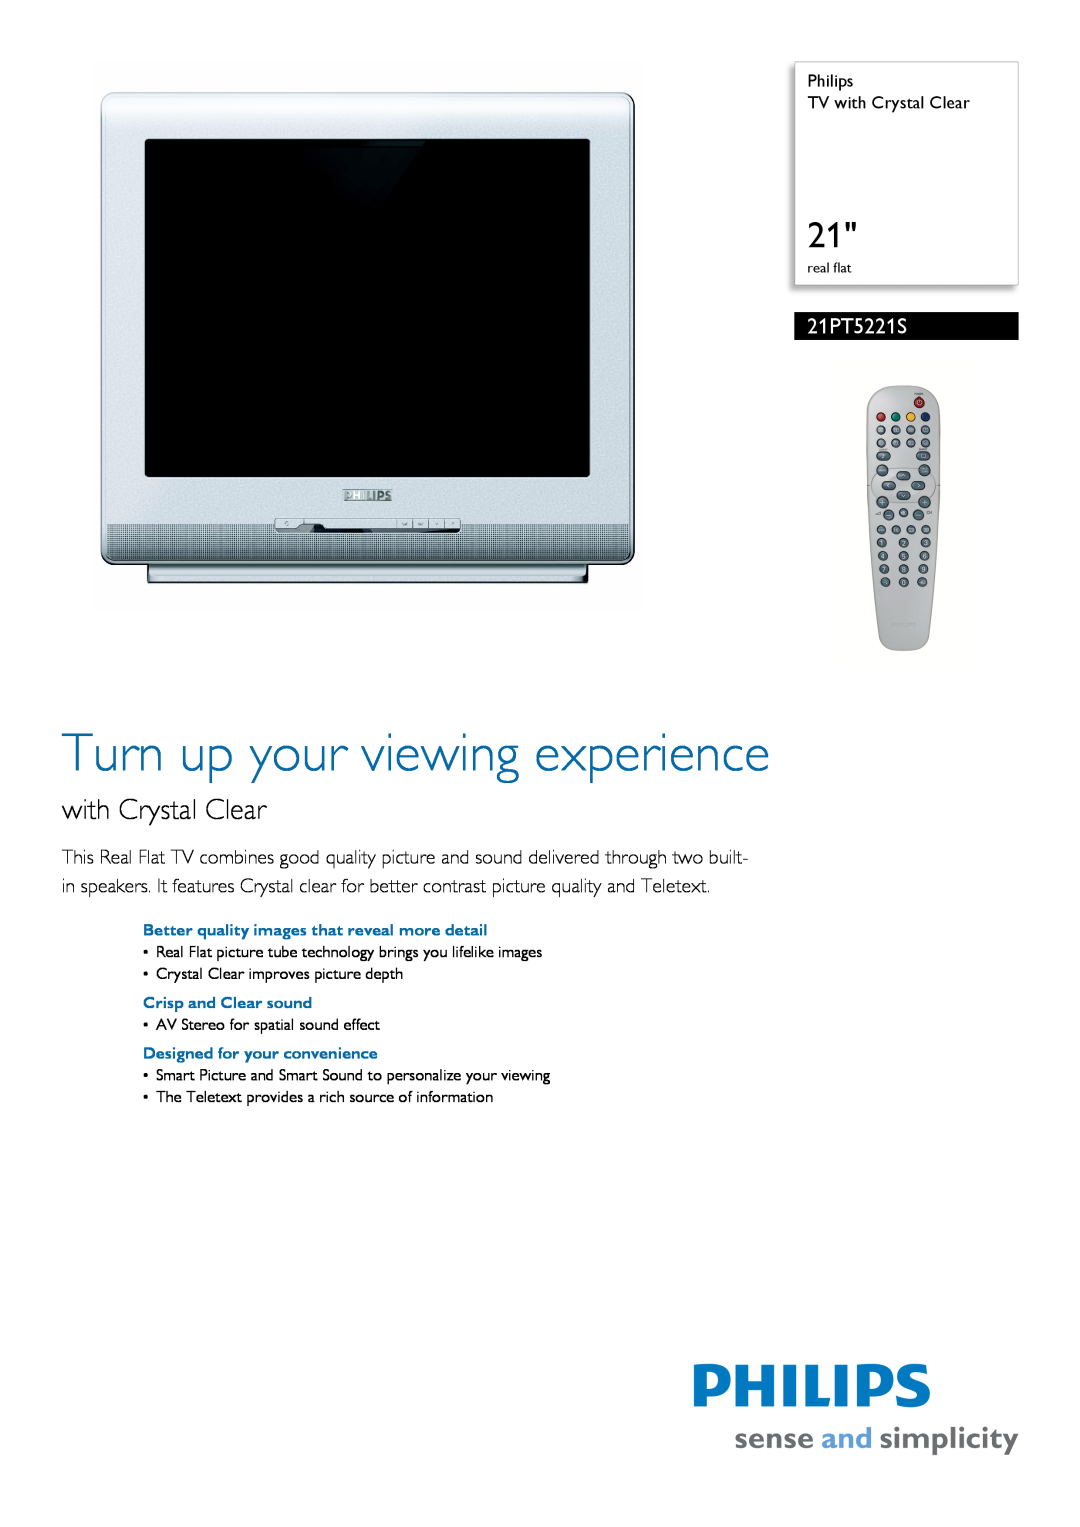 Philips 21PT5221S manual Turn up your viewing experience, with Crystal Clear 